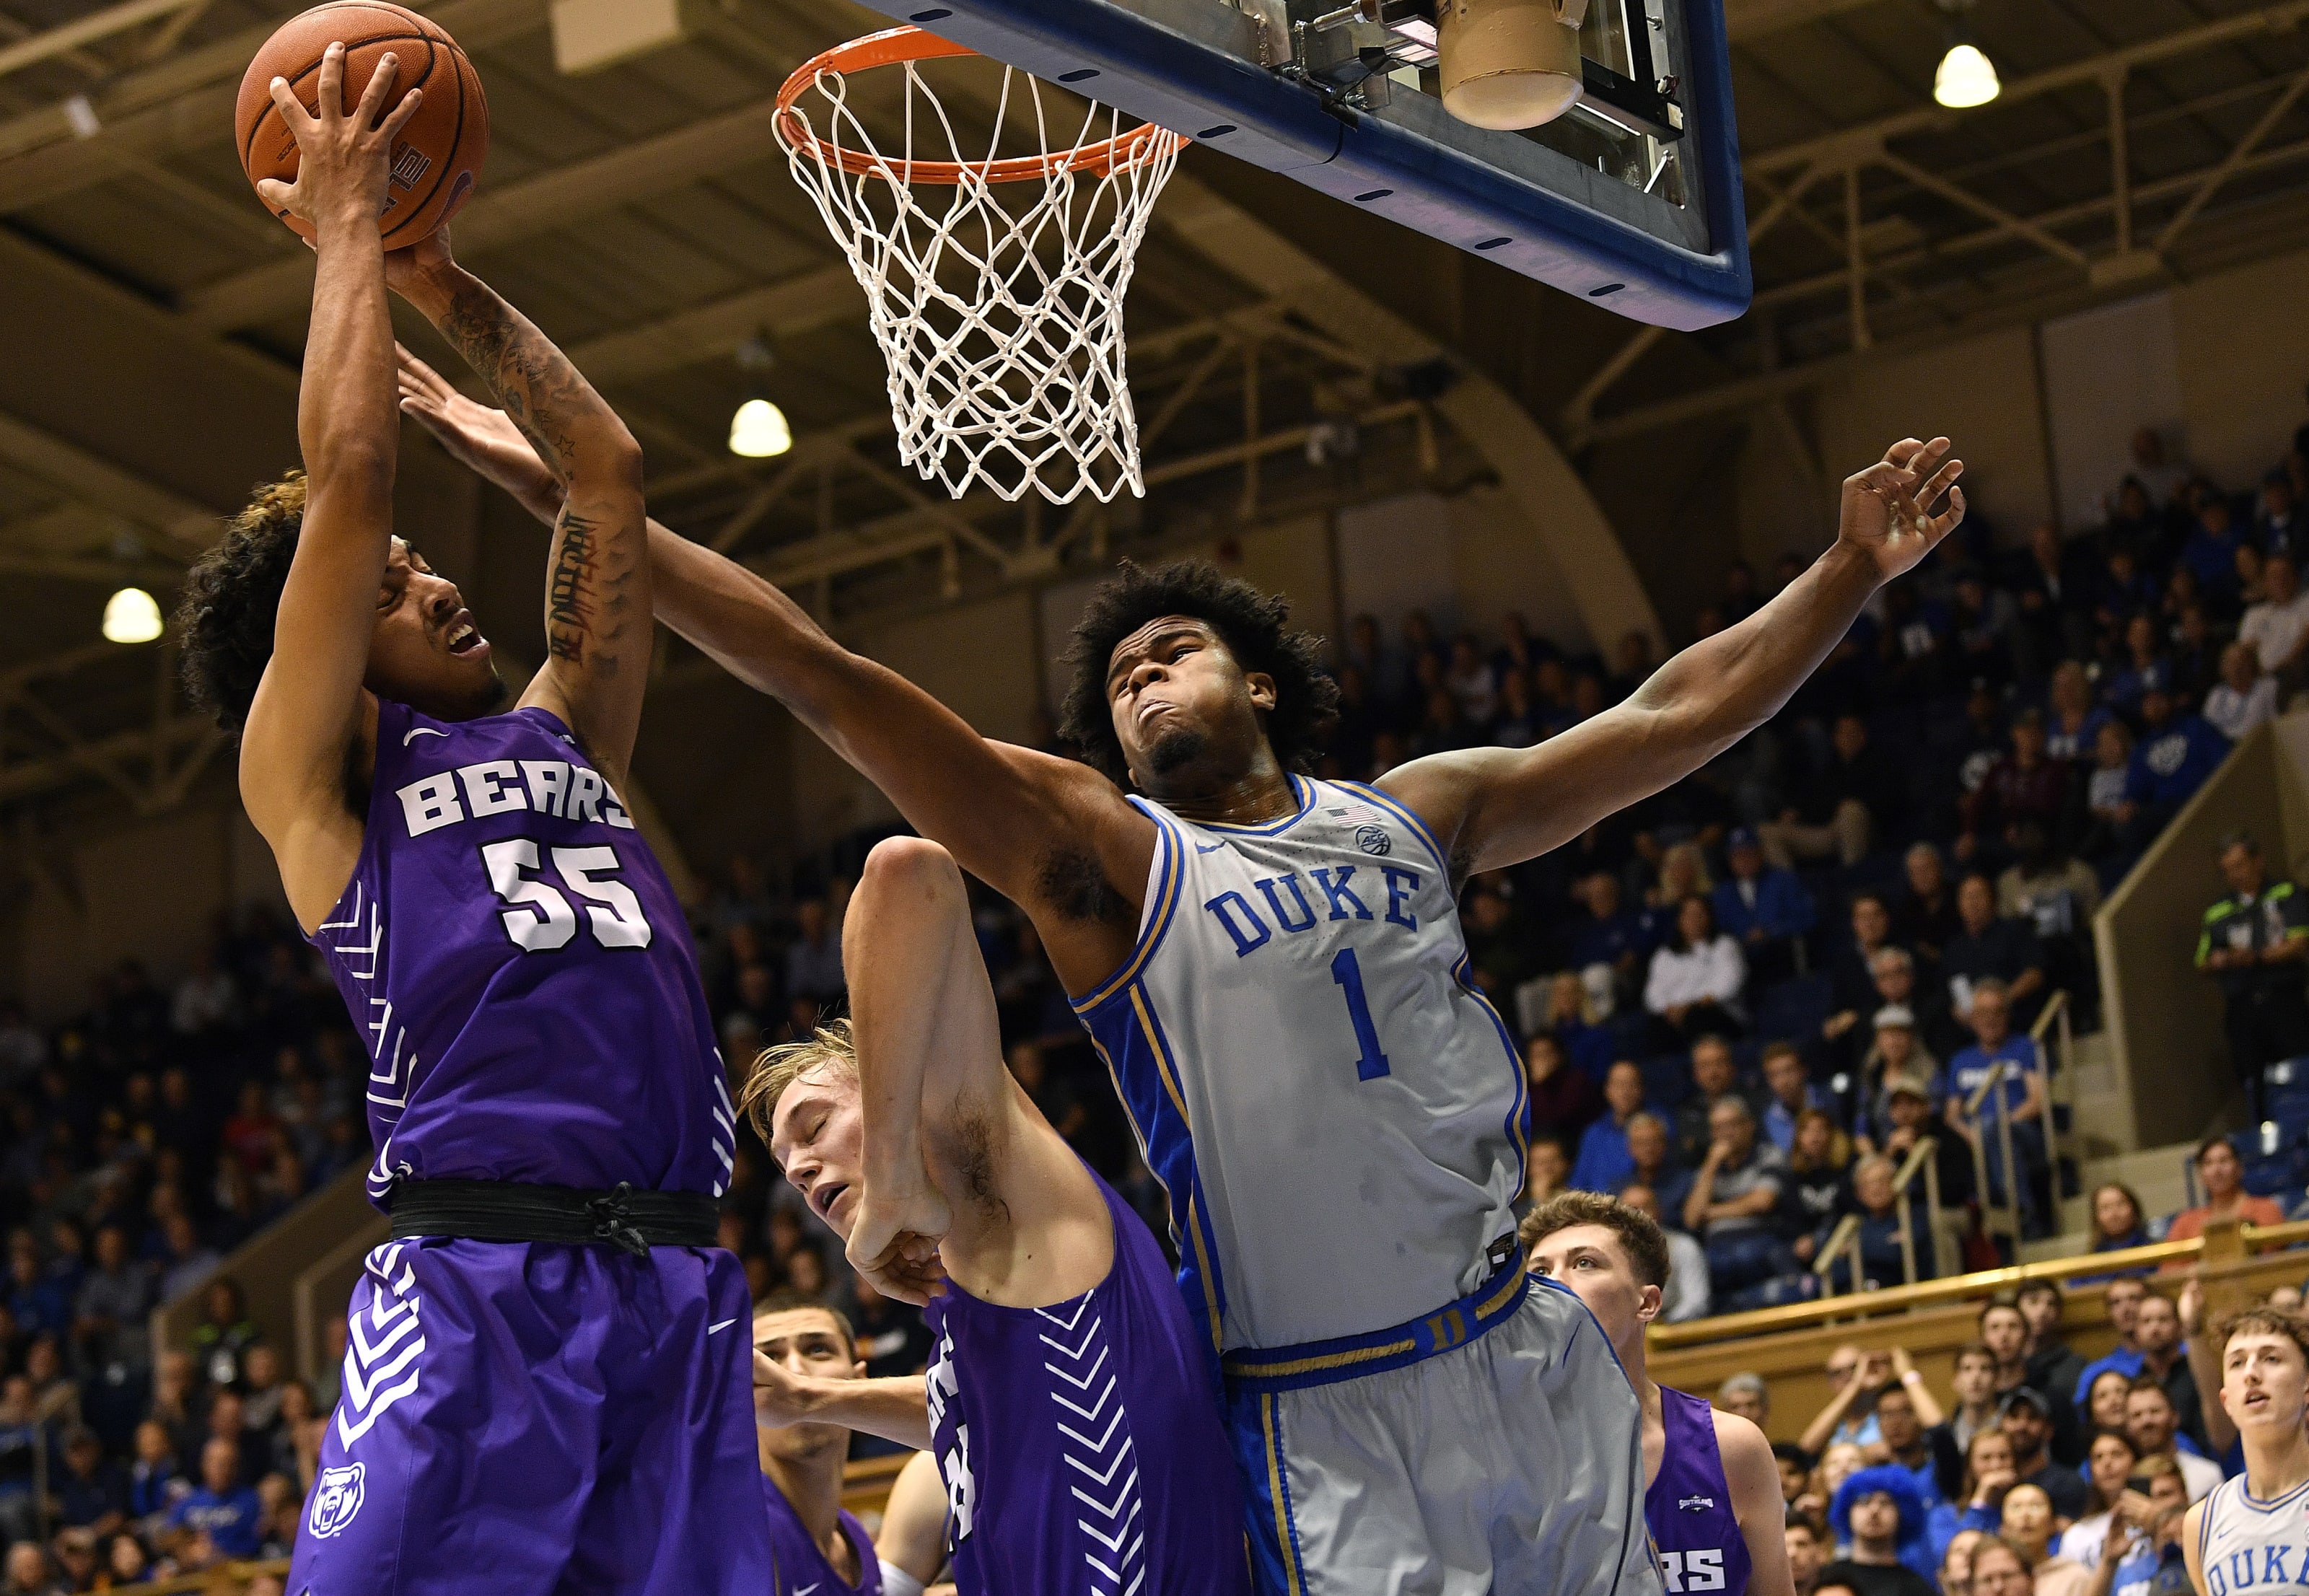 Stock up from the Duke basketball victory over Central Arkansas